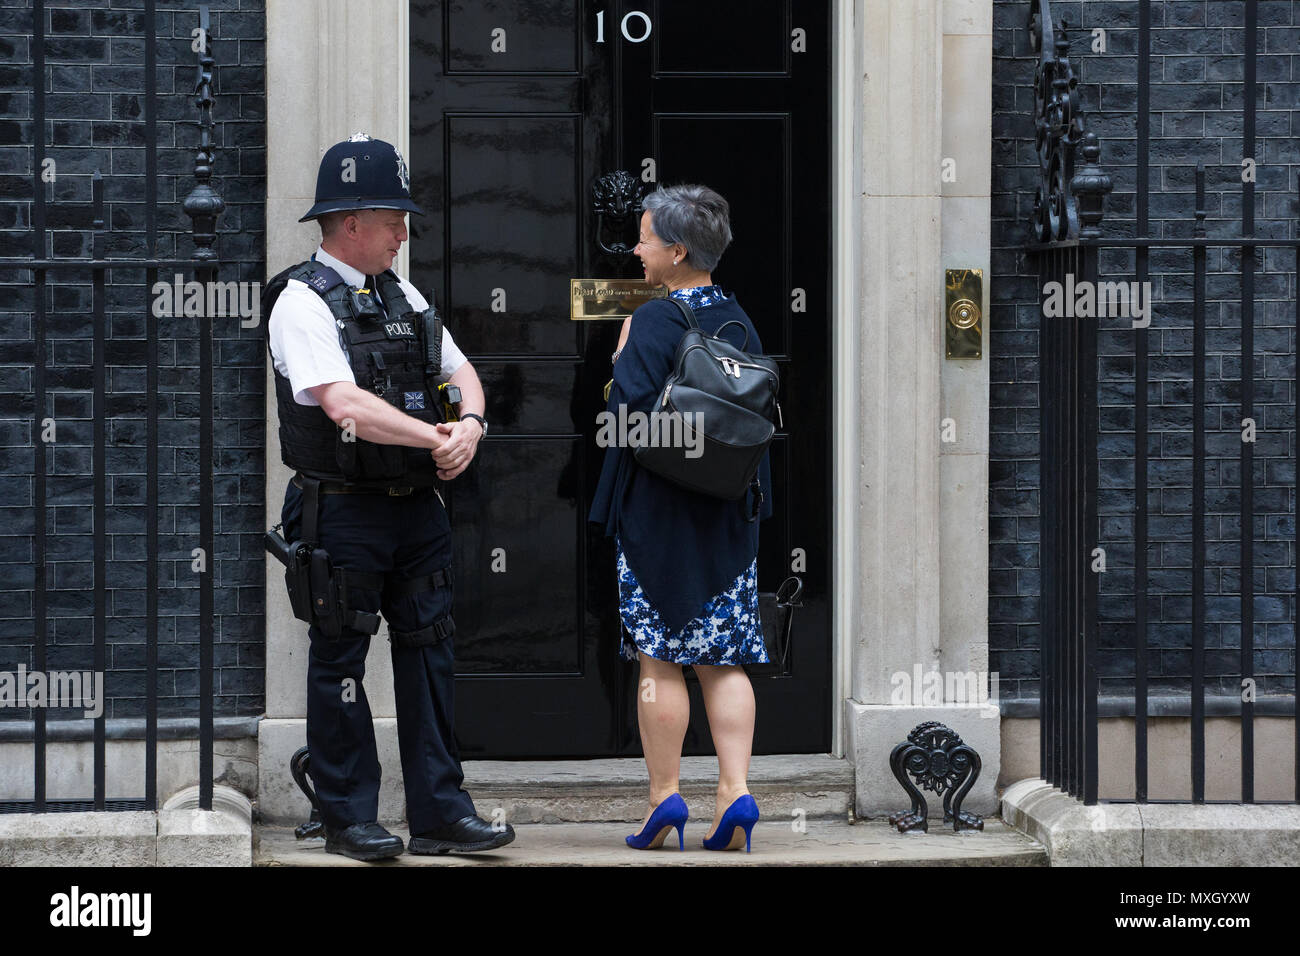 London, UK. 4th June, 2018. Leaders of some of the UK's largest businesses arrive at 10 Downing Street for a Business Advisory Council meeting during which Prime Minister Theresa May and Government Ministers are expected to provide them with an update regarding Brexit talks. Credit: Mark Kerrison/Alamy Live News Stock Photo